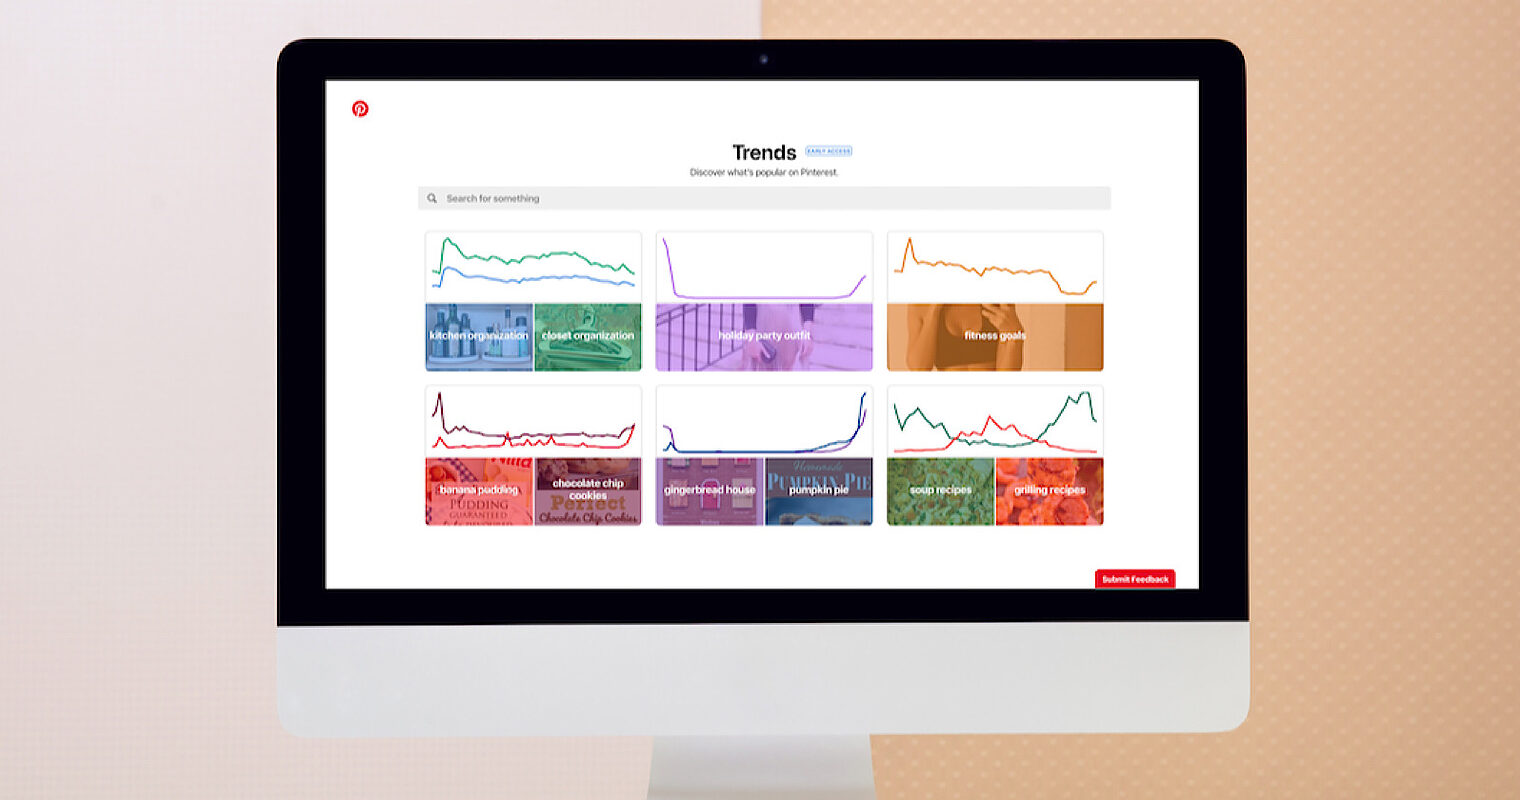 Pinterest Introduces Tool For Discovering Top US Search Terms